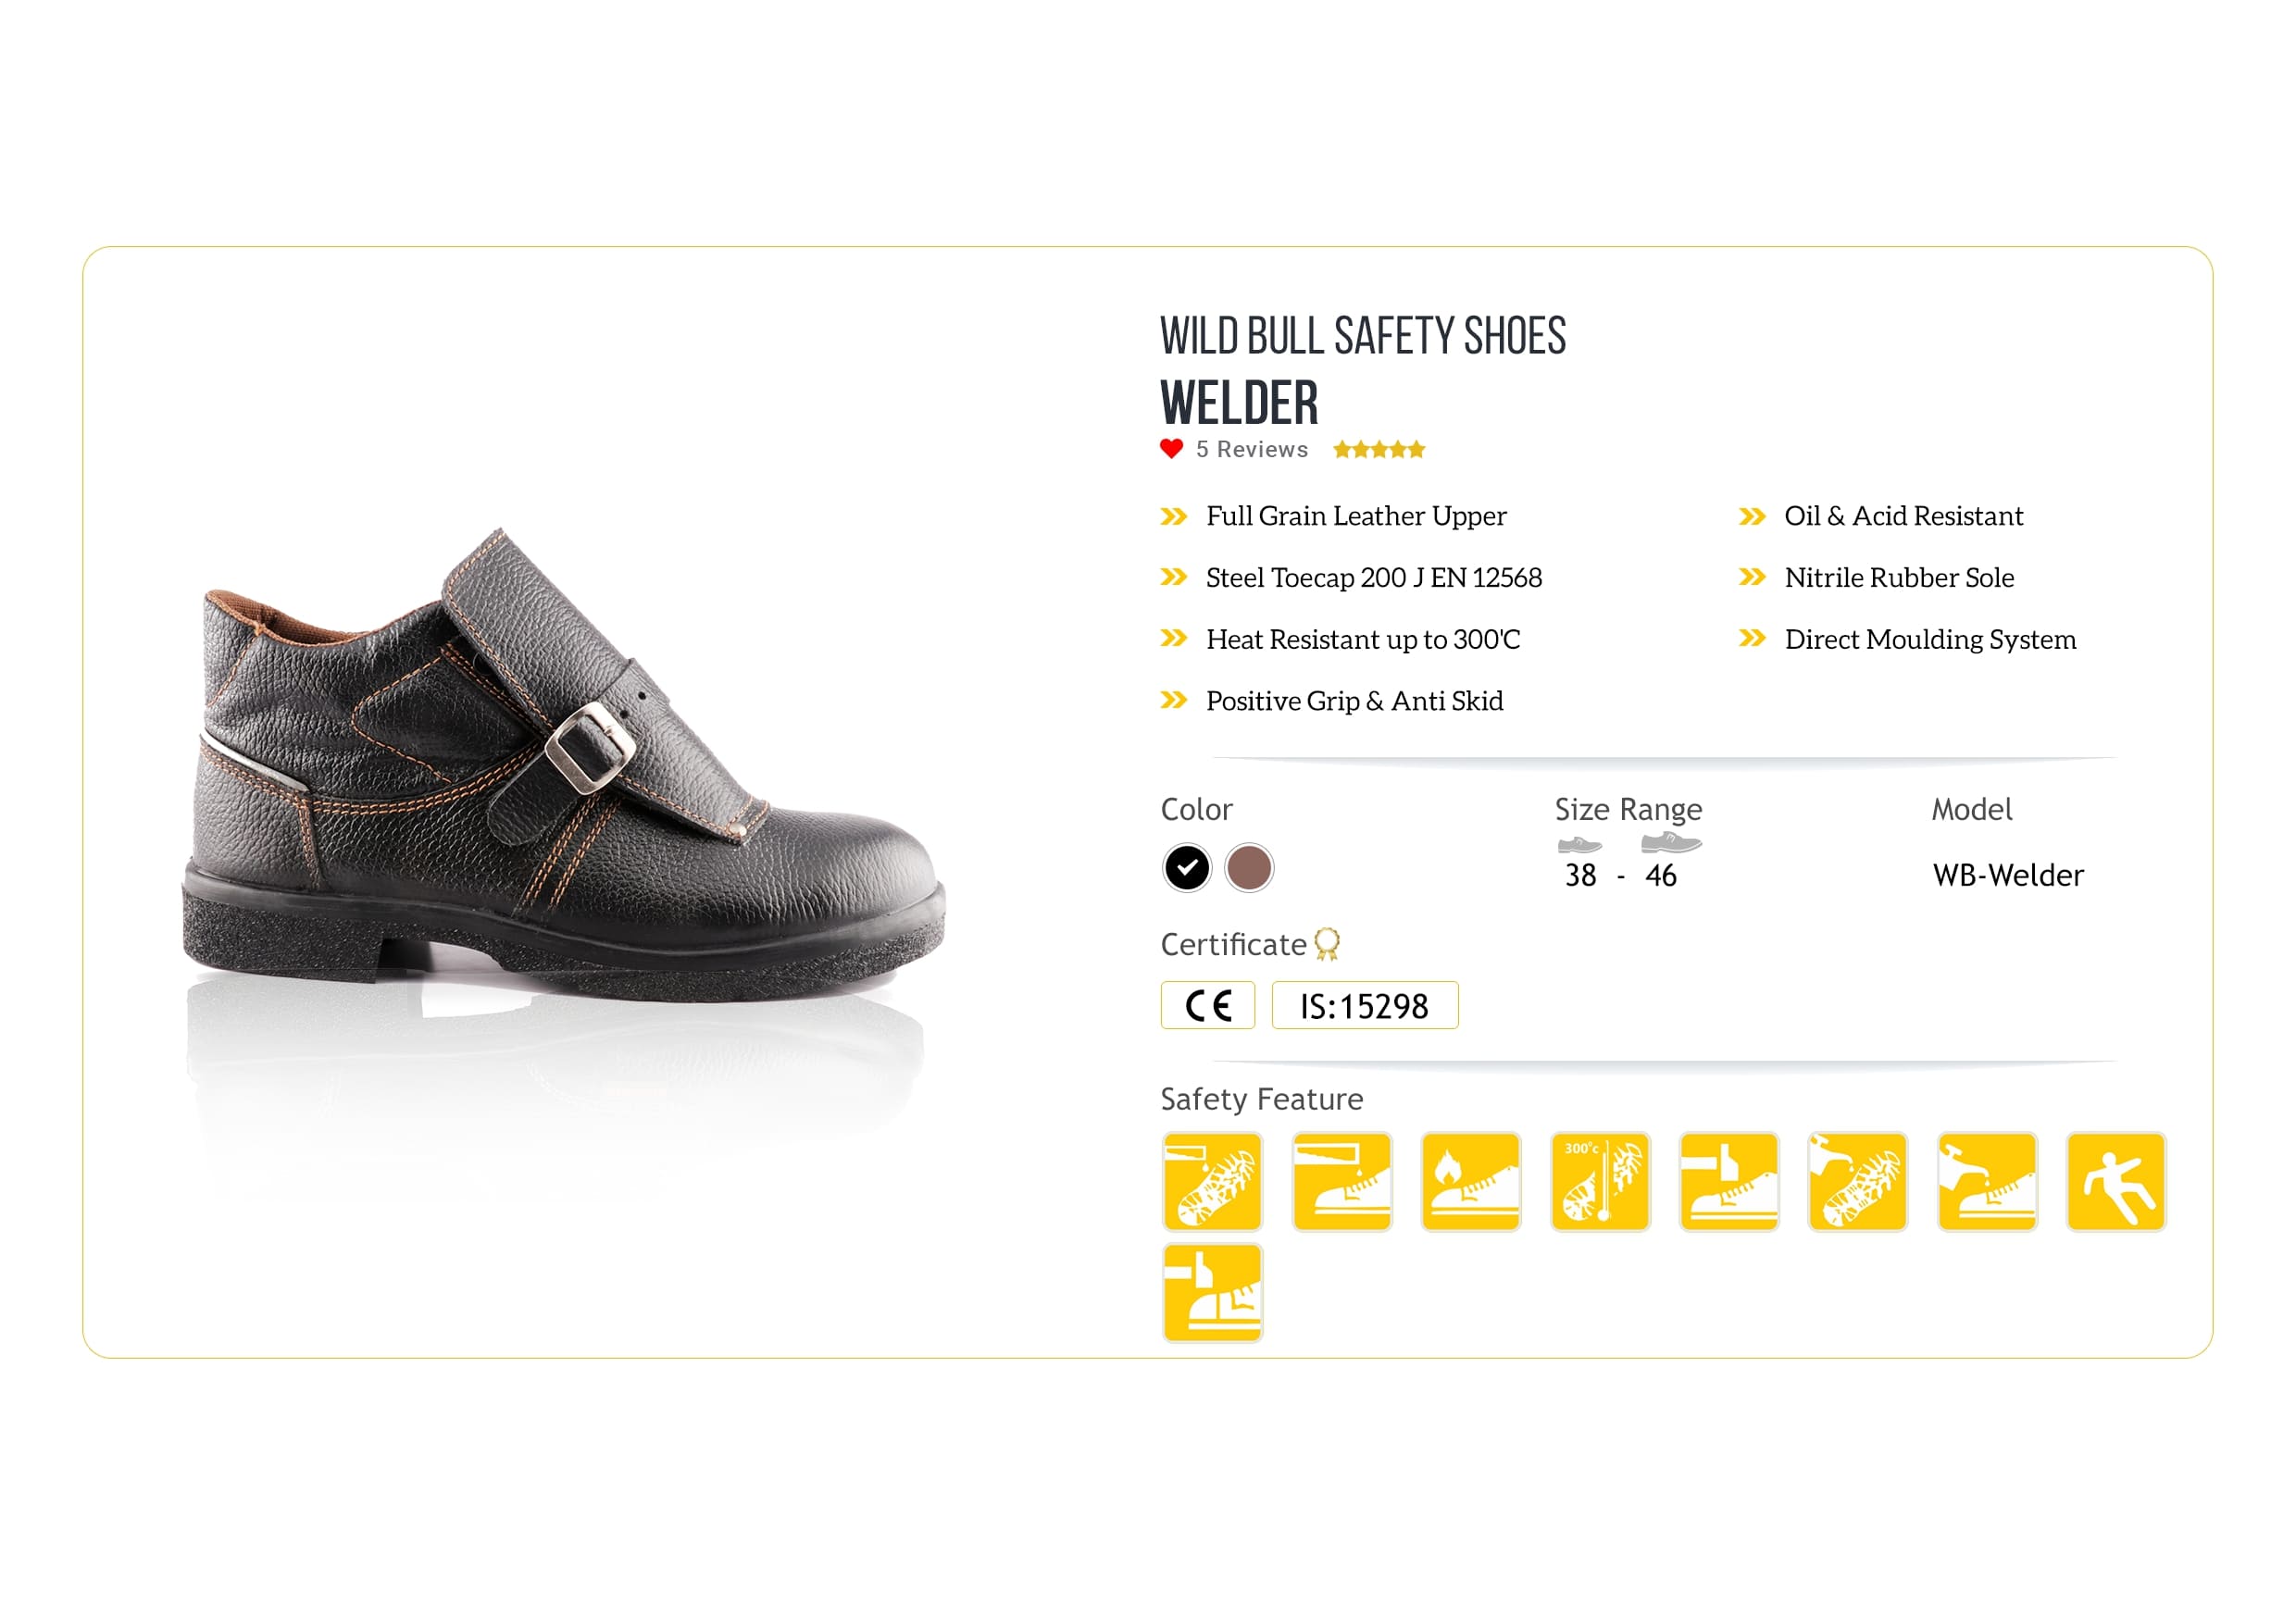 WILD BULL SAFETY SHOES